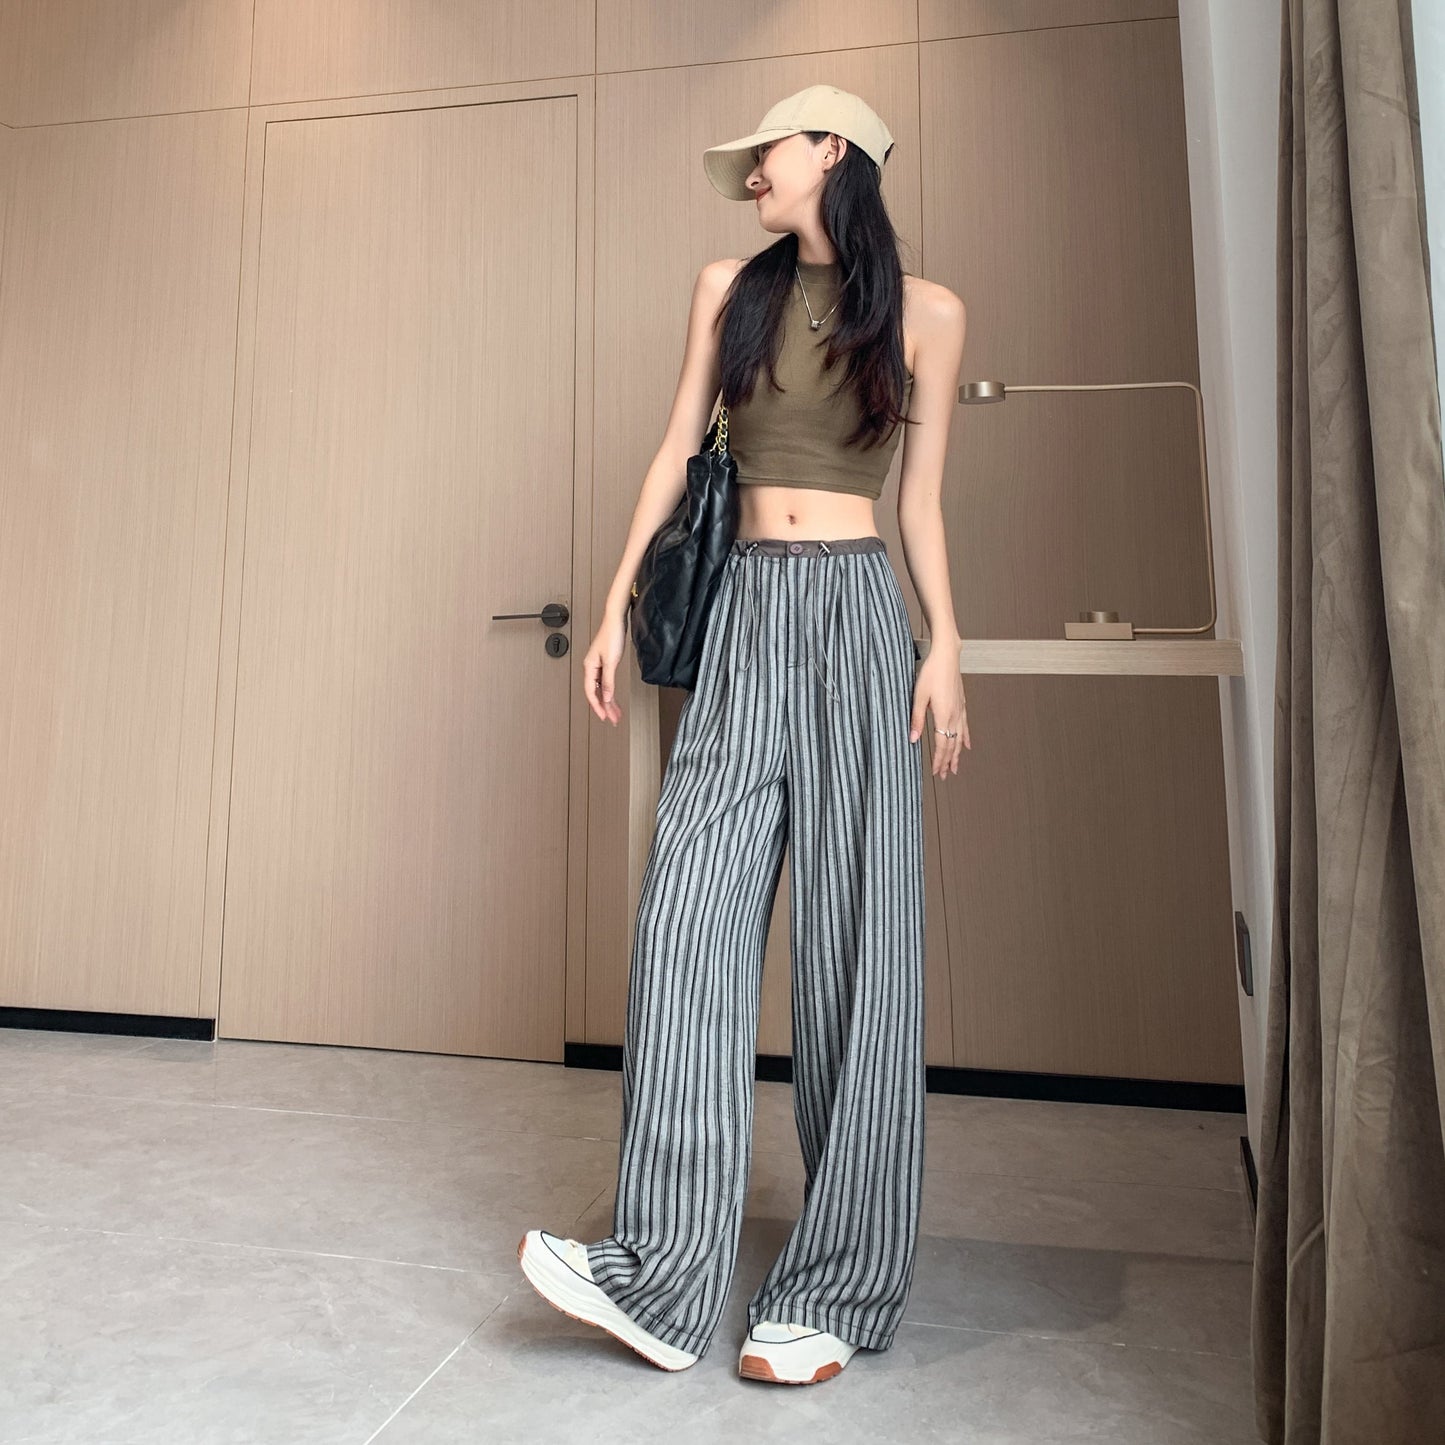 Loose Fit High-Waisted Lazy Thin Straight Stripe Drawstring Pants